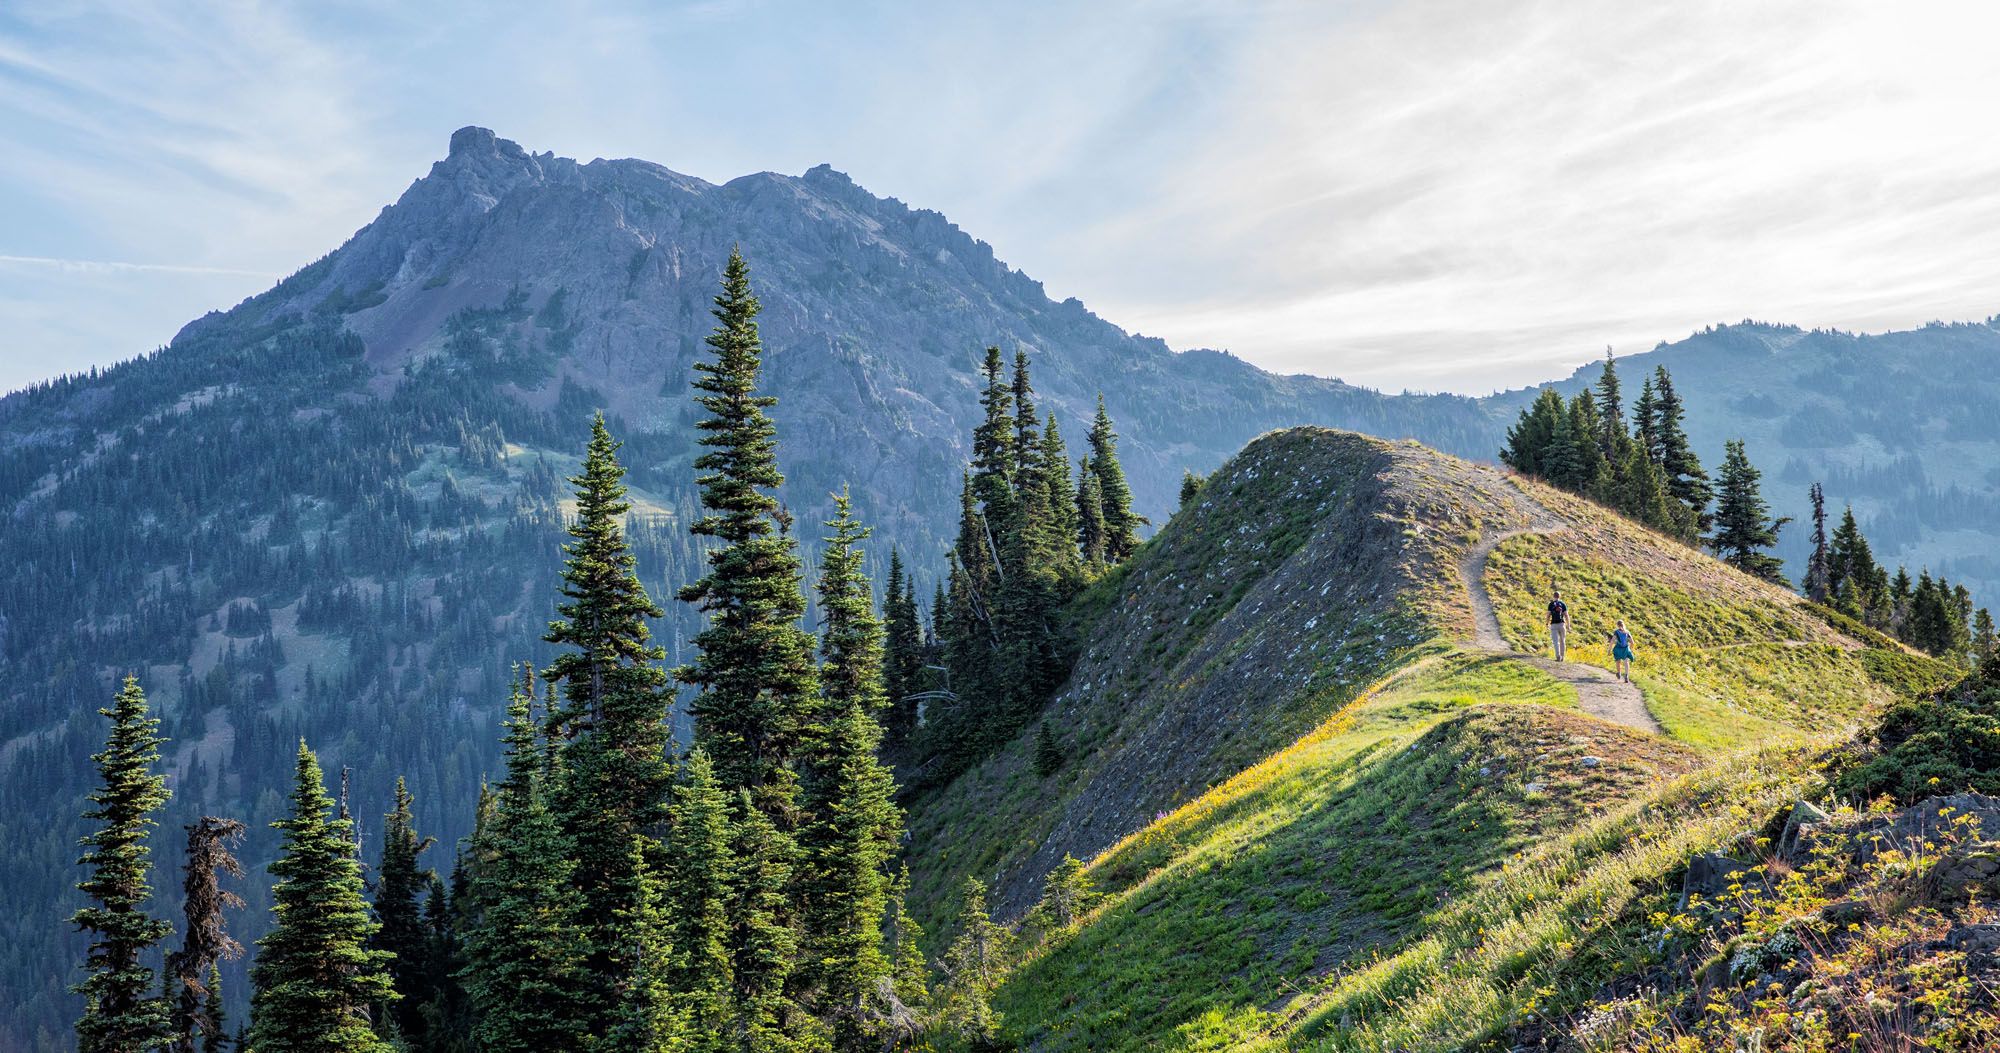 Featured image for “Hiking the Klahhane Ridge Trail to Mount Angeles, Olympic NP”